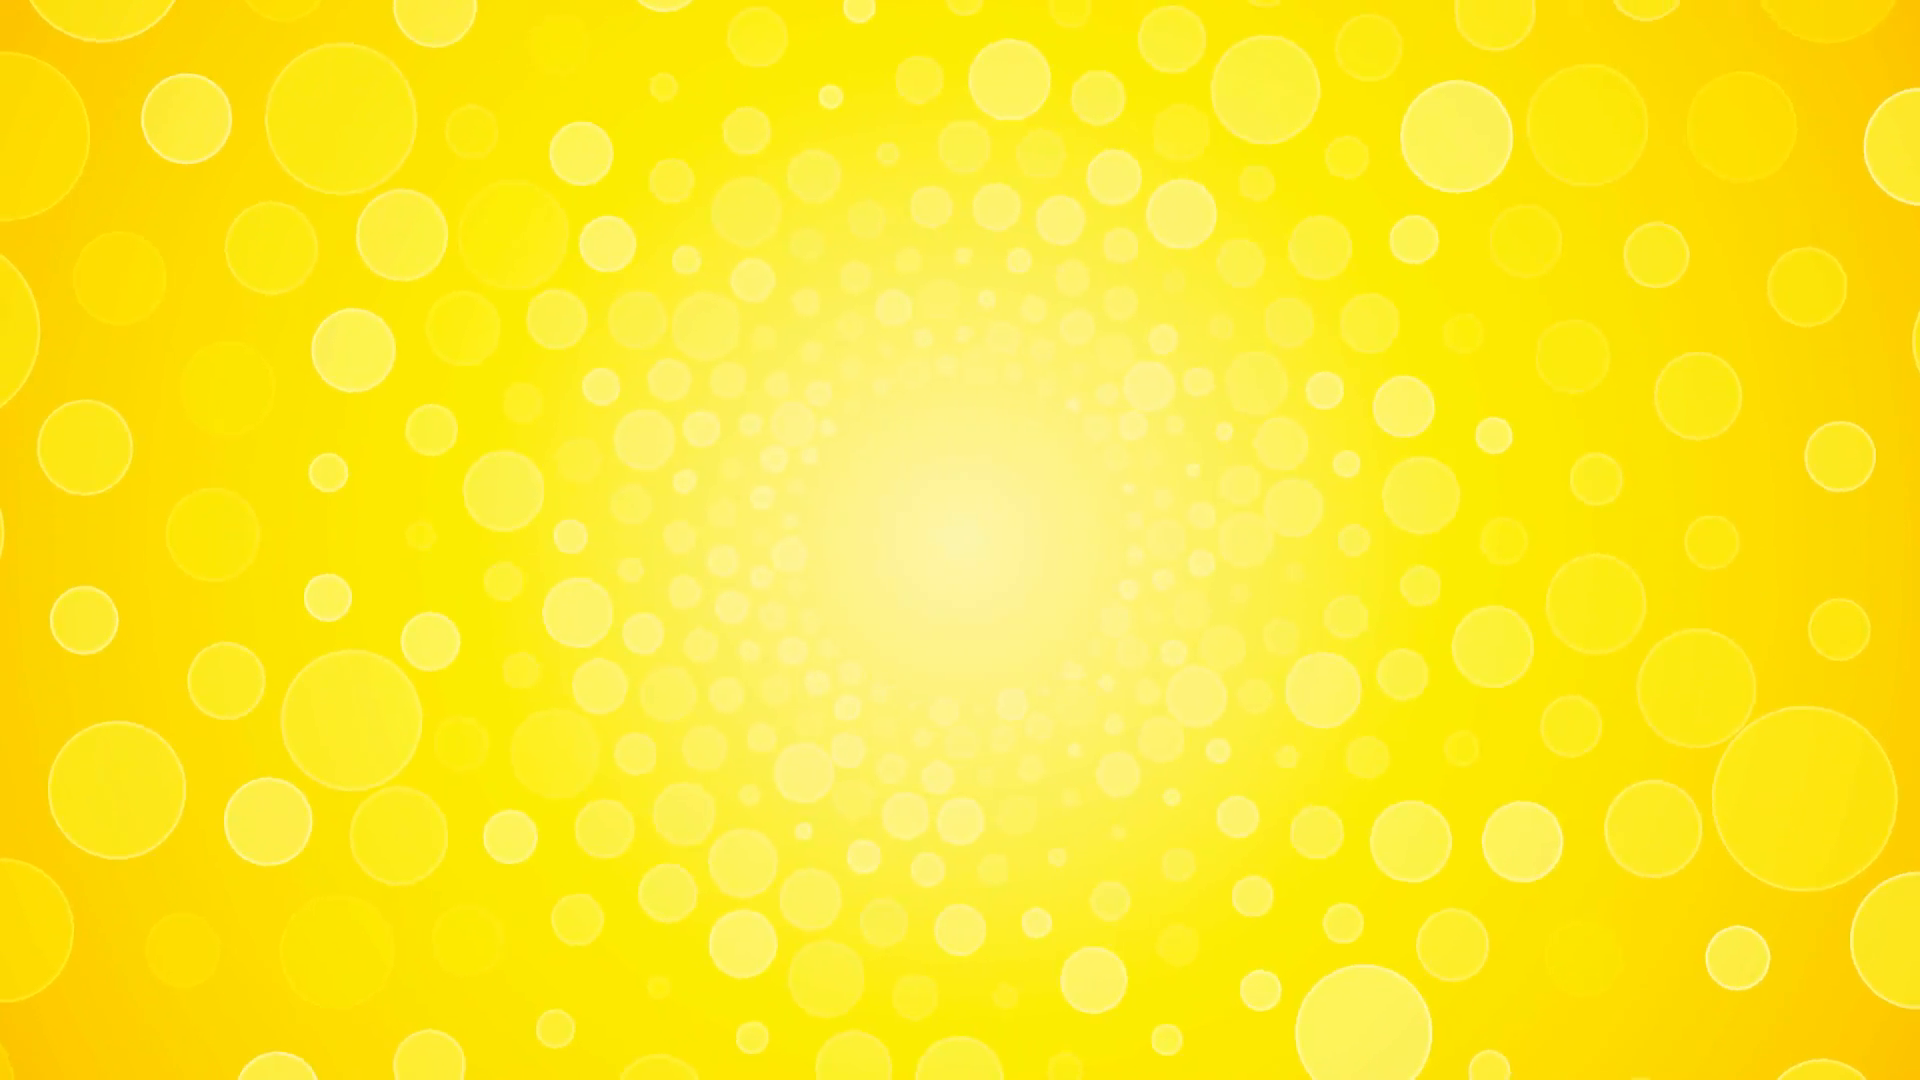 Rotating Bright Yellow Background With Circles Summer Sun Endless